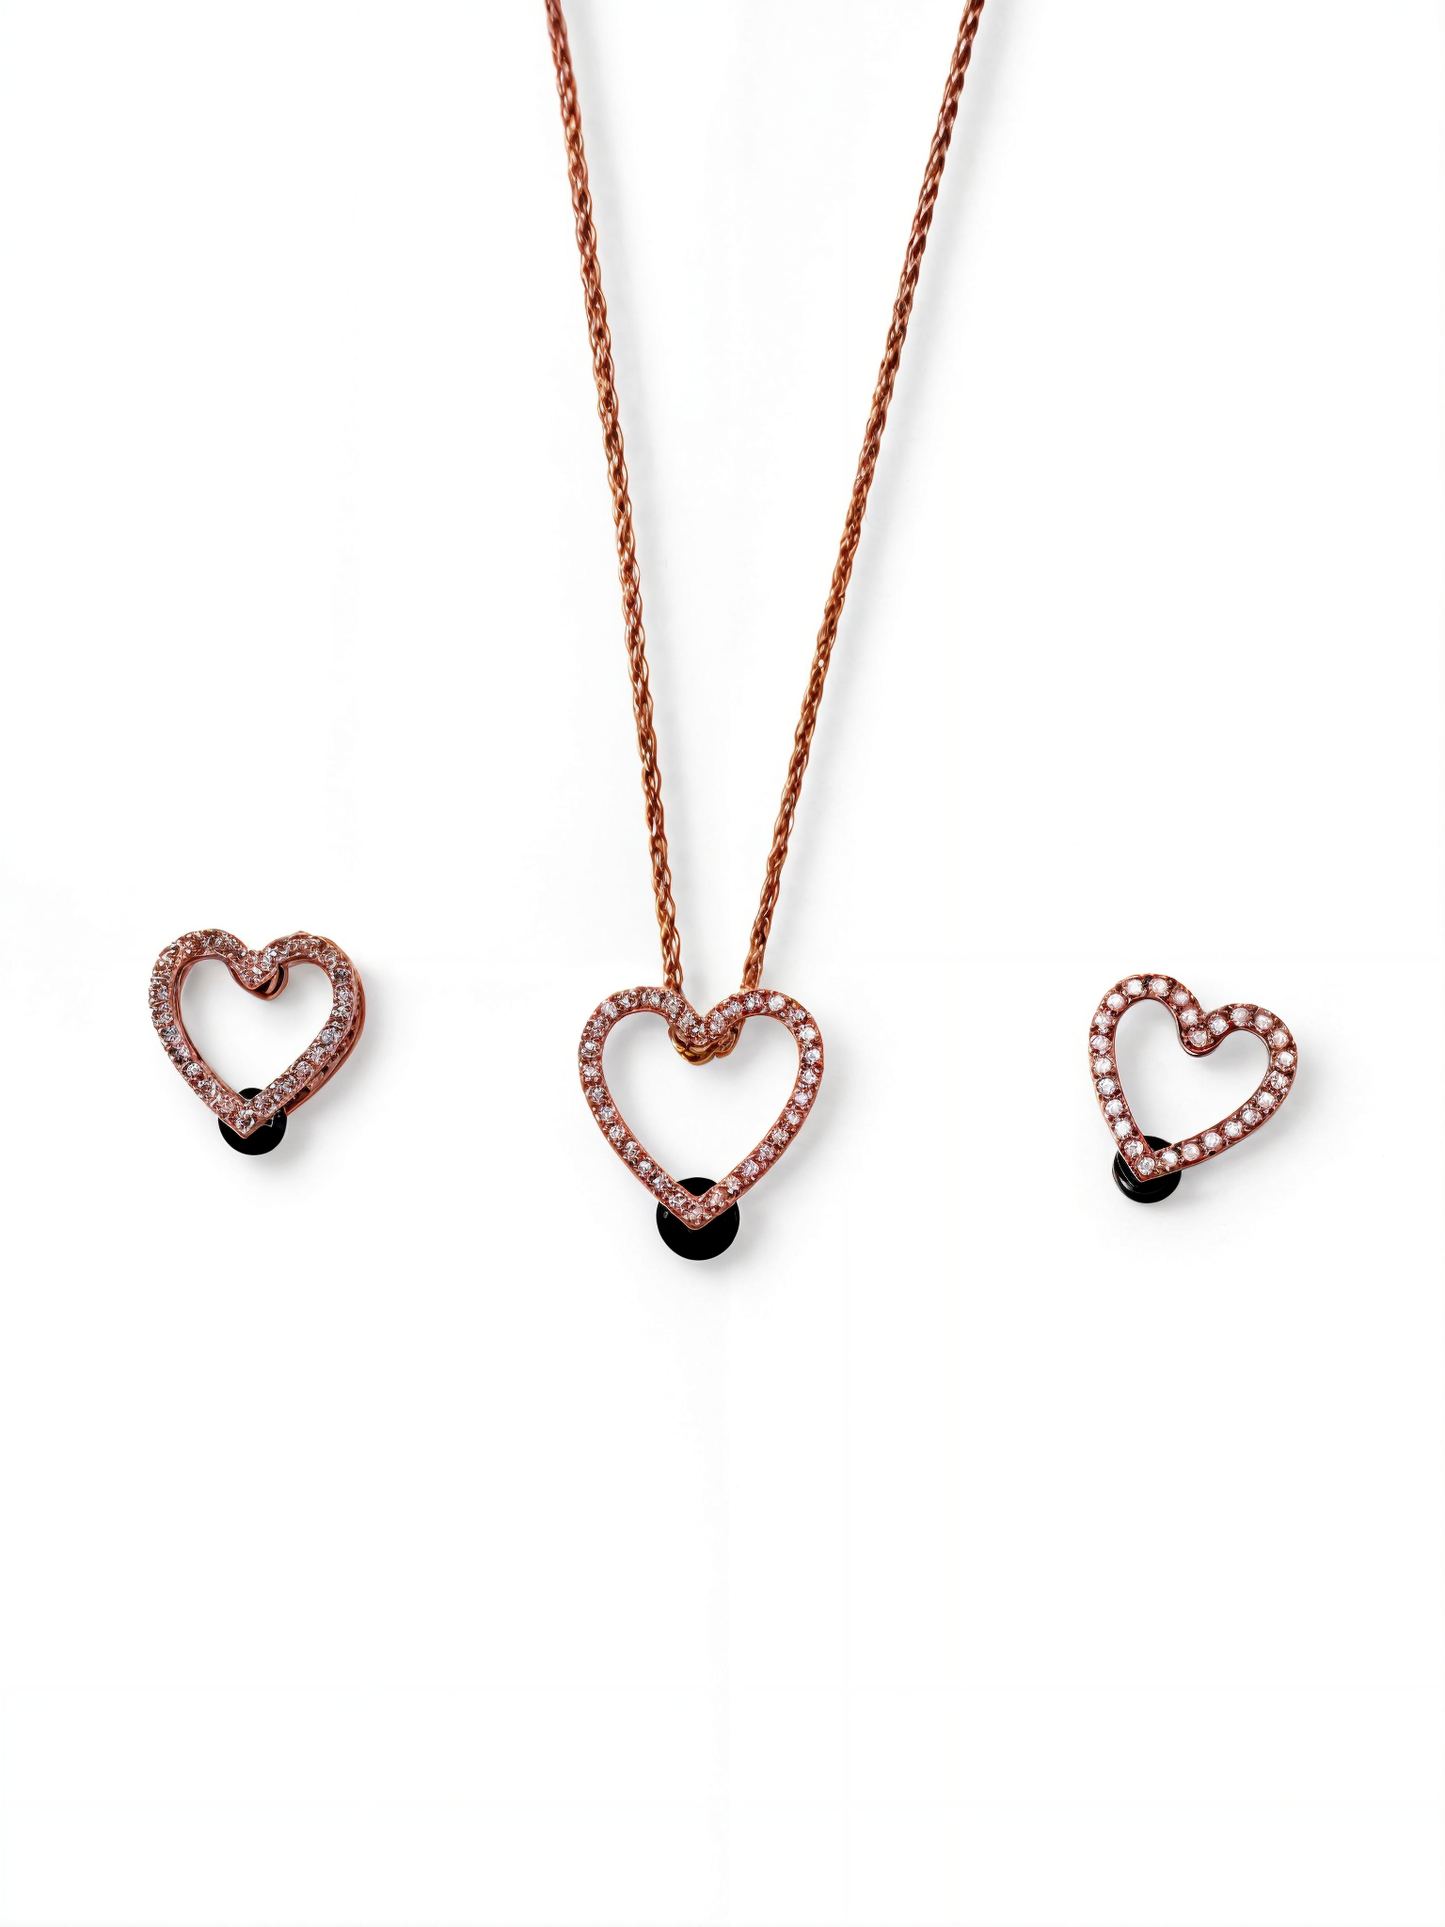 Heart Pendant Set with CZ and Dark Stone